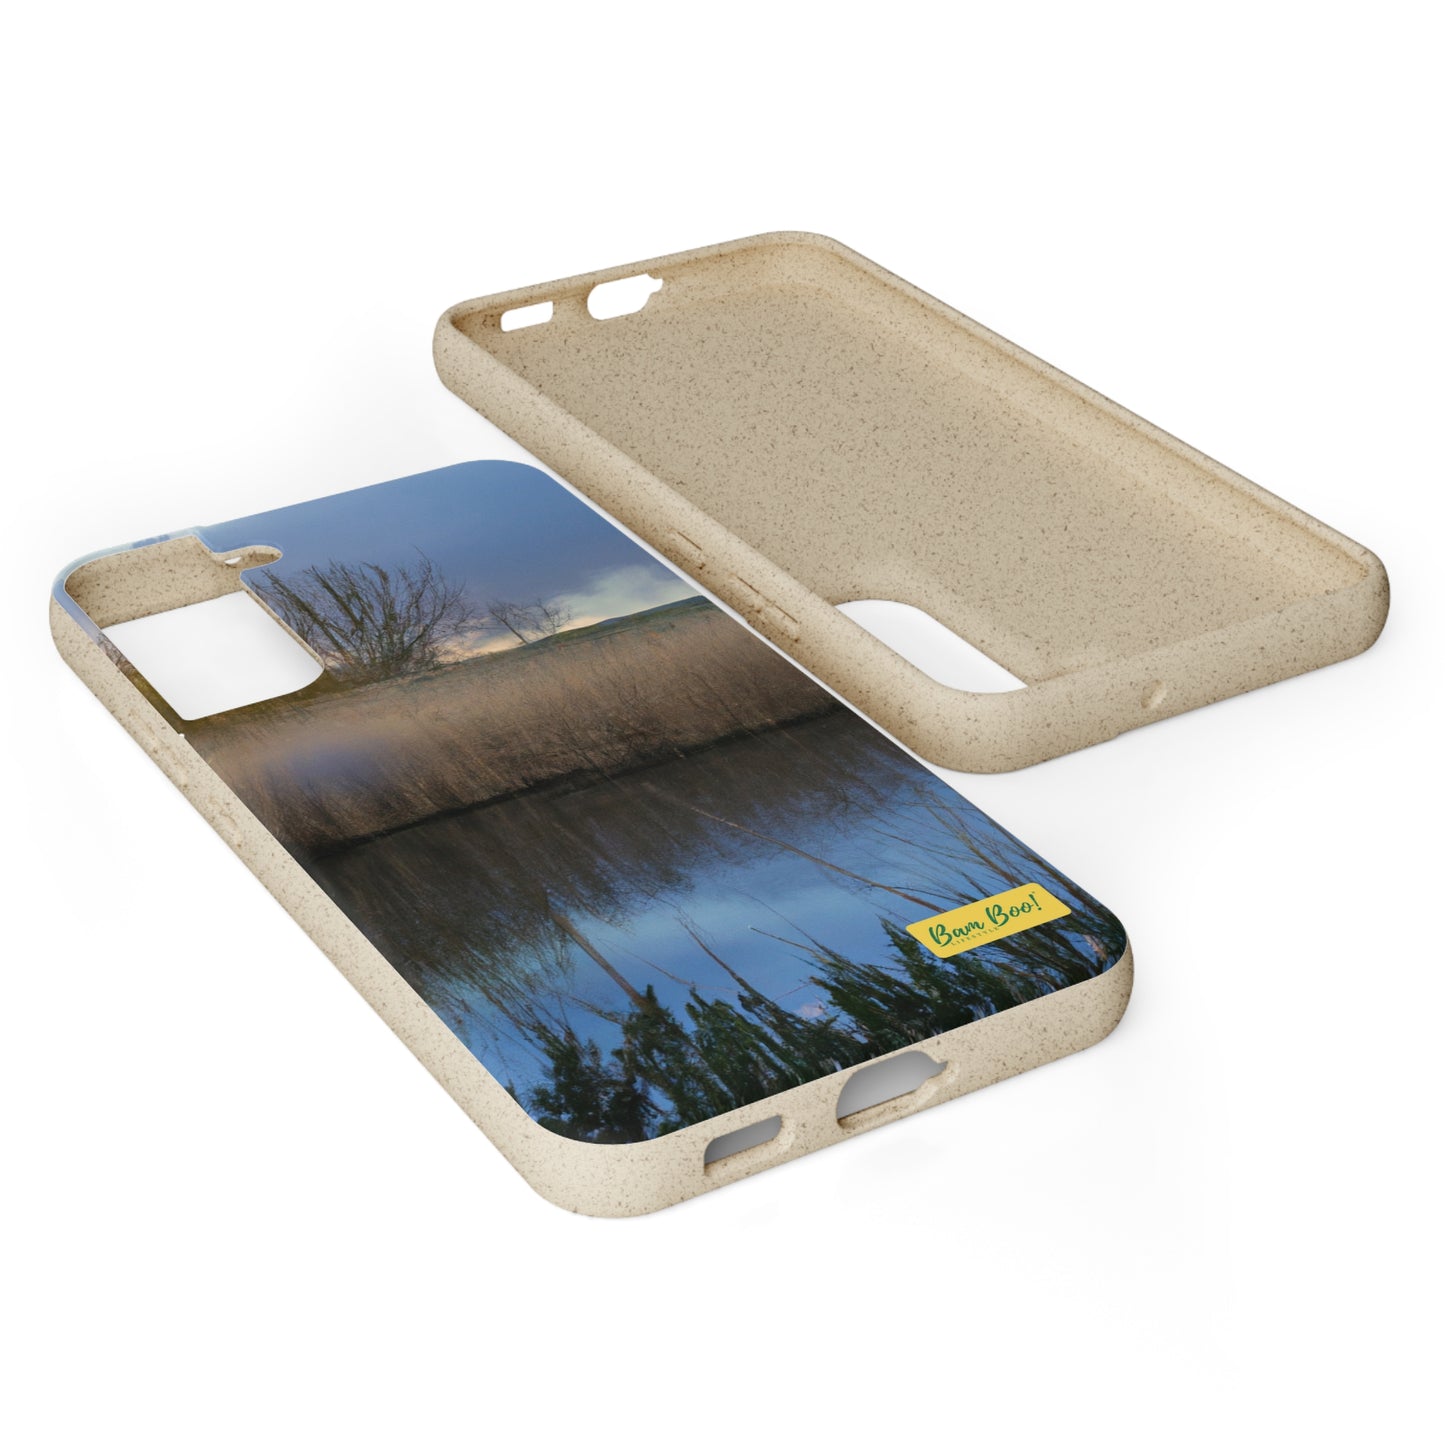 "Nature in Light and Color" - Bam Boo! Lifestyle Eco-friendly Cases